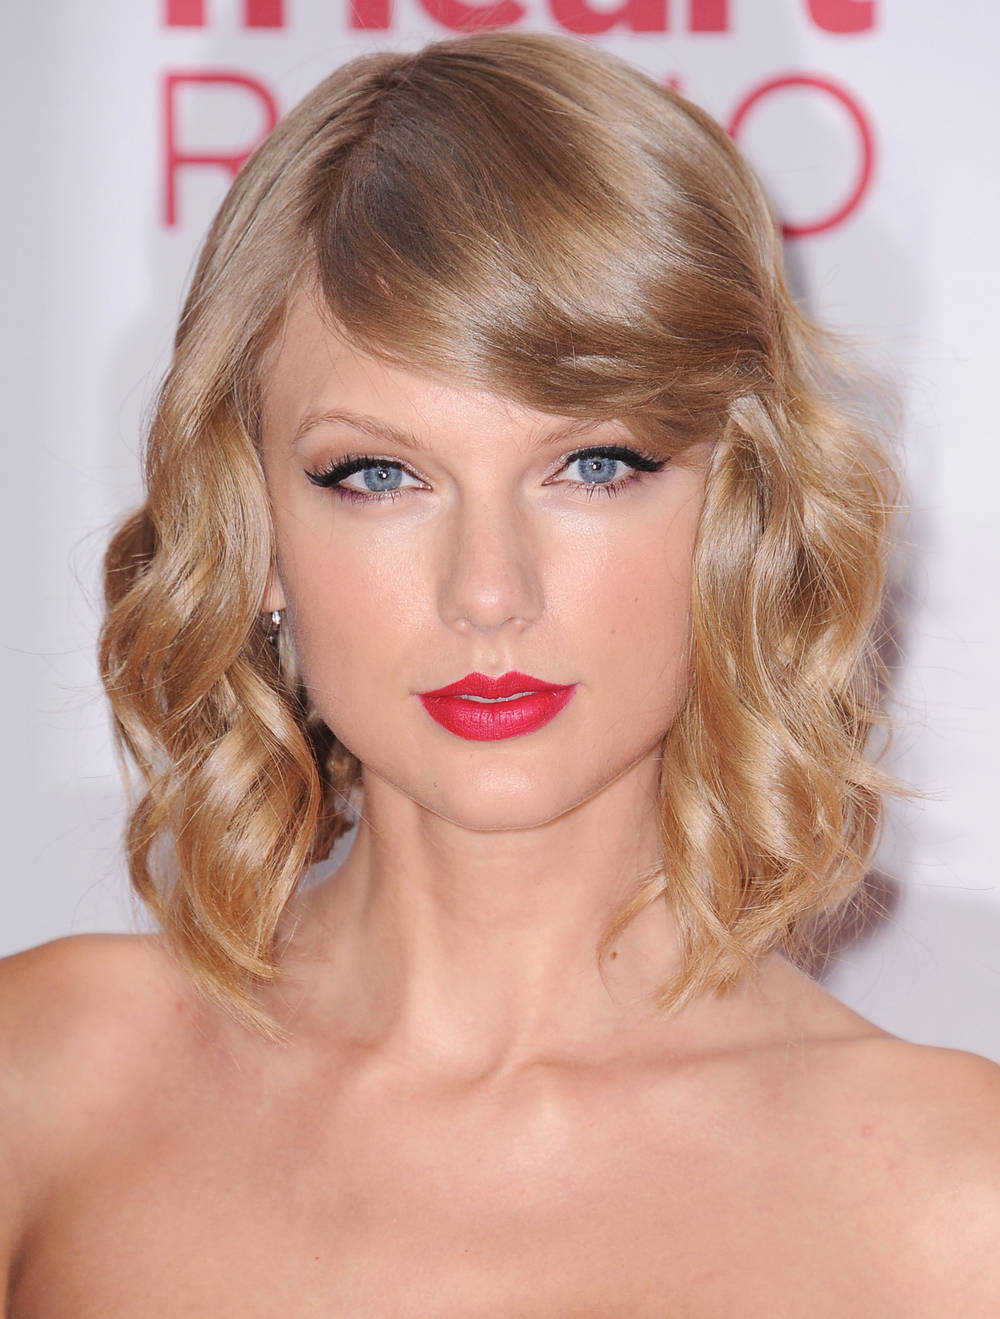 Picture of Taylor Swift in General Pictures - taylor-swift-1415118643 ...